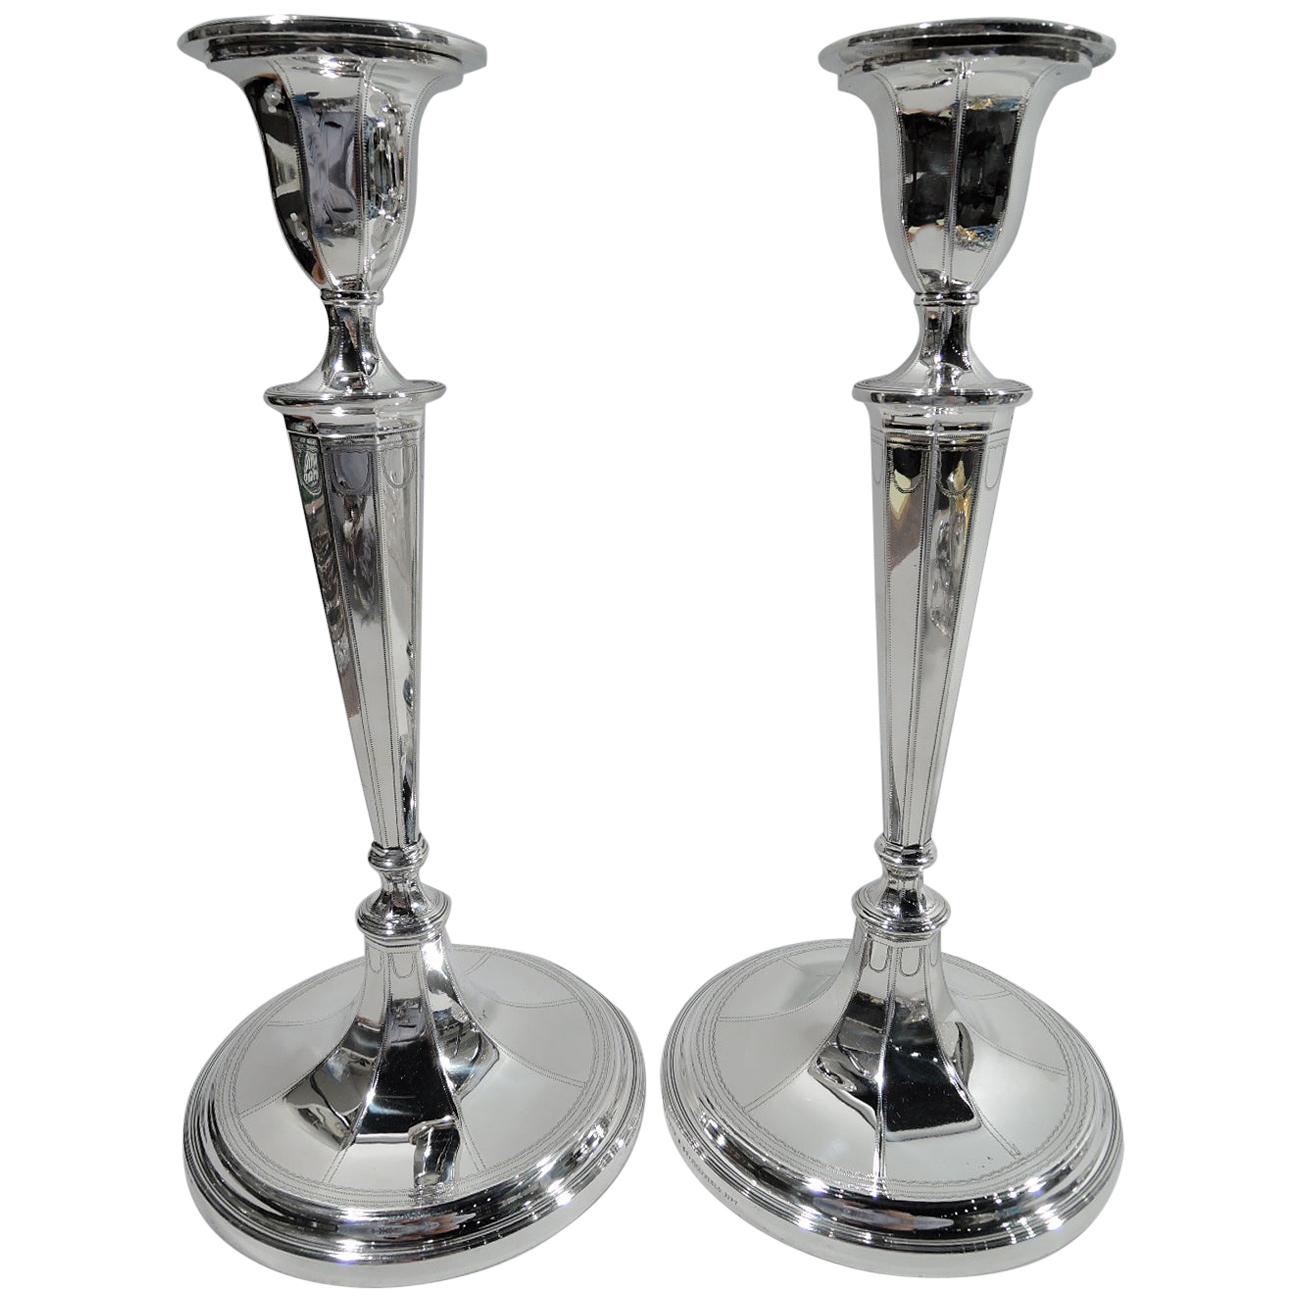 Pair of Antique Tiffany English Neoclassical Candlesticks